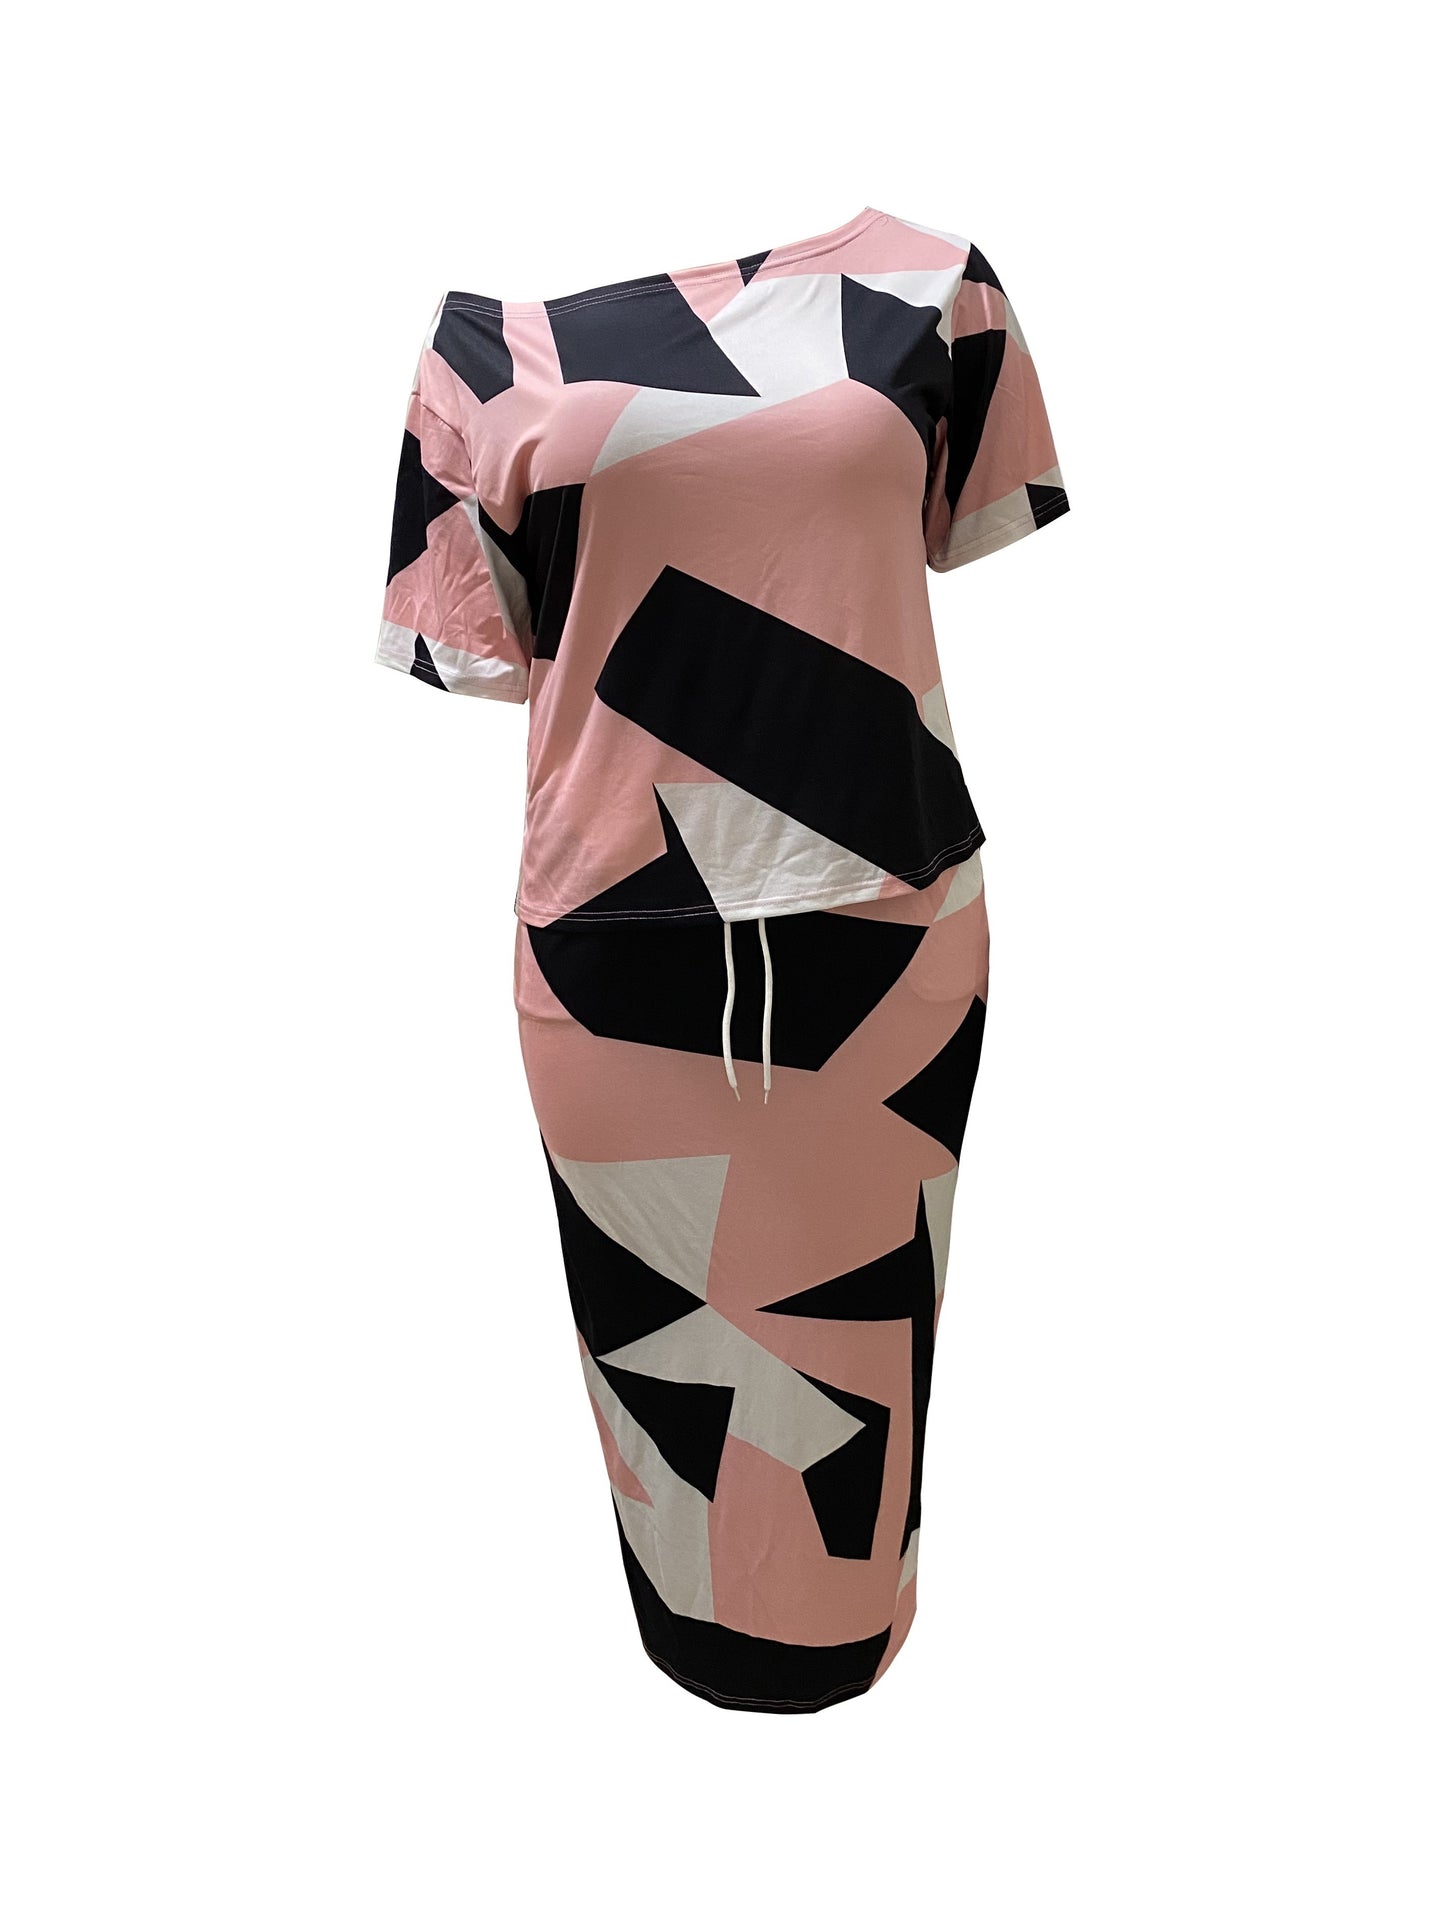 Plus Size Casual Outfits Set, Women's Plus Colorblock Geometric Print One Shoulder Short Sleeve Top & Pocketed Drawstring Skirt Outfits Two Piece Set